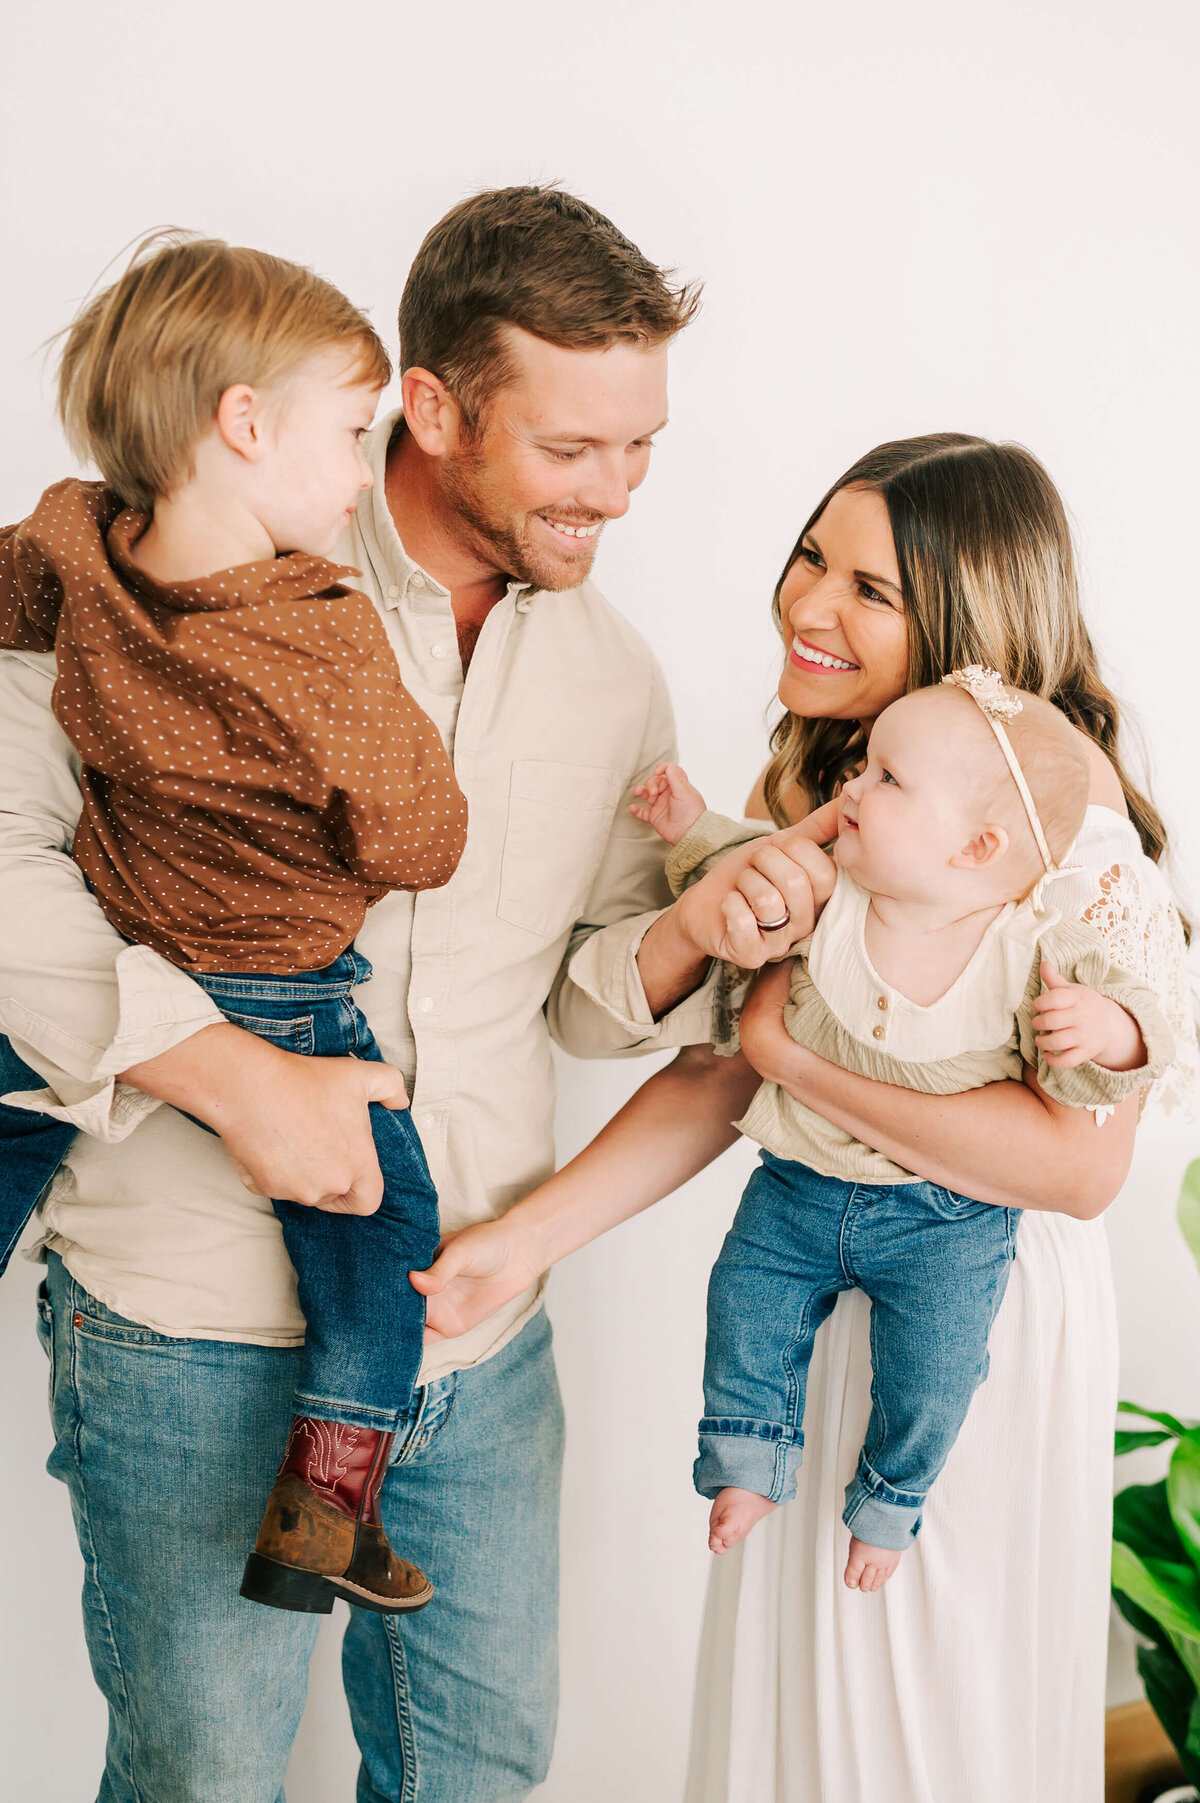 Springfield MO family photographer Jessica Kennedy of The XO Photography captures parents tickling kids